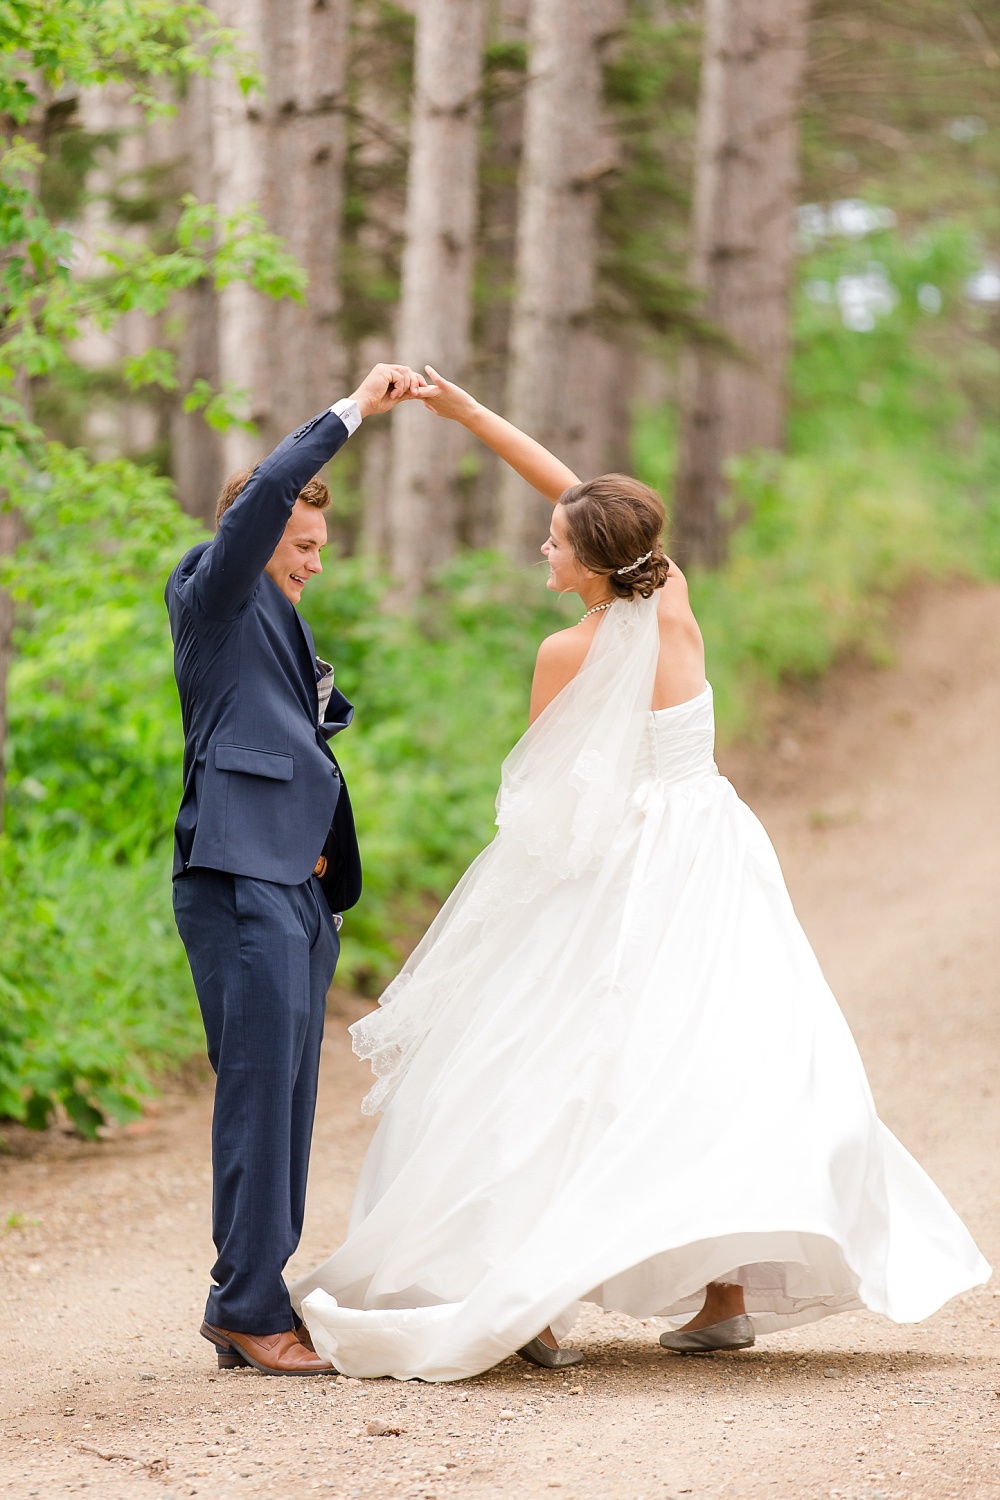 Wolf Lake, MN Country Styled Wedding, White Dress, Blue Suite | Photographed by Amber Langerud Photography | Close-up of Groom Twirling the Bride